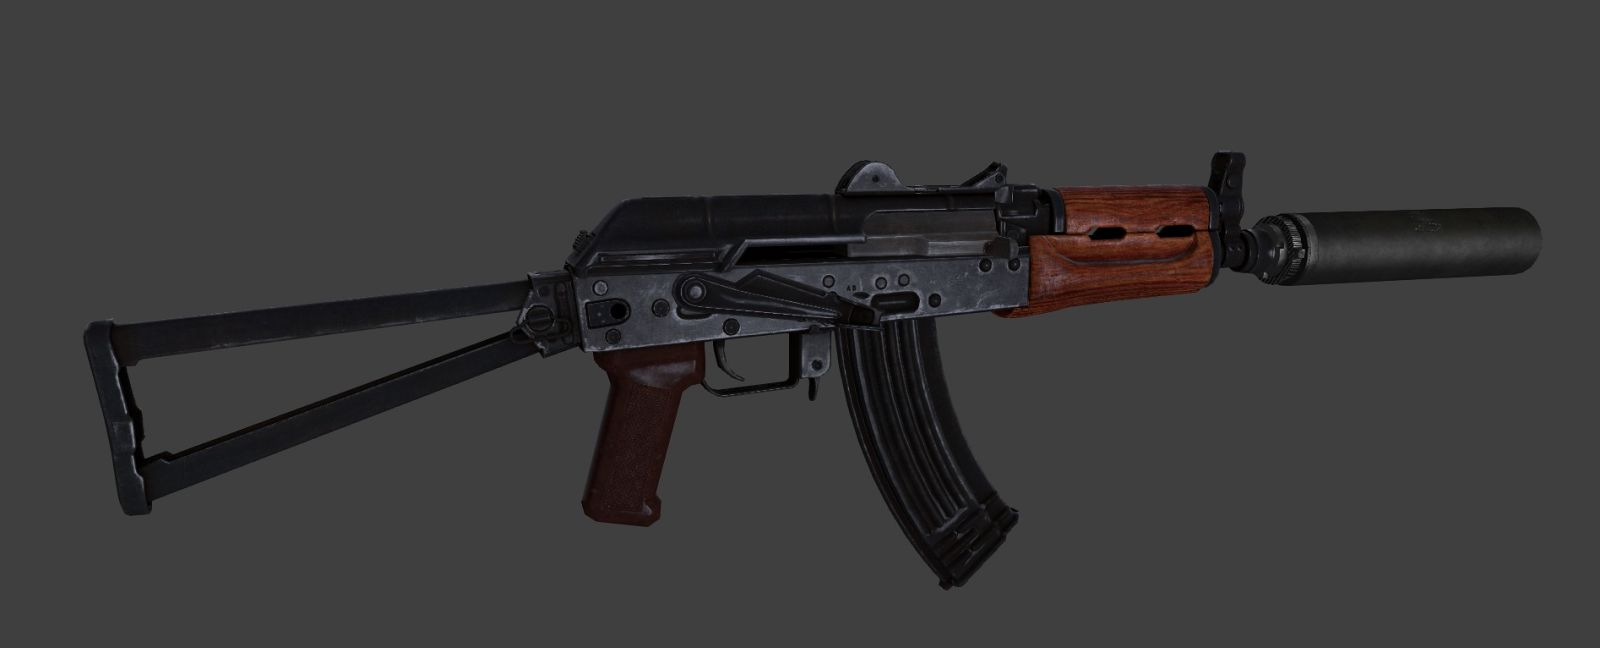 AKS74U for M4A1